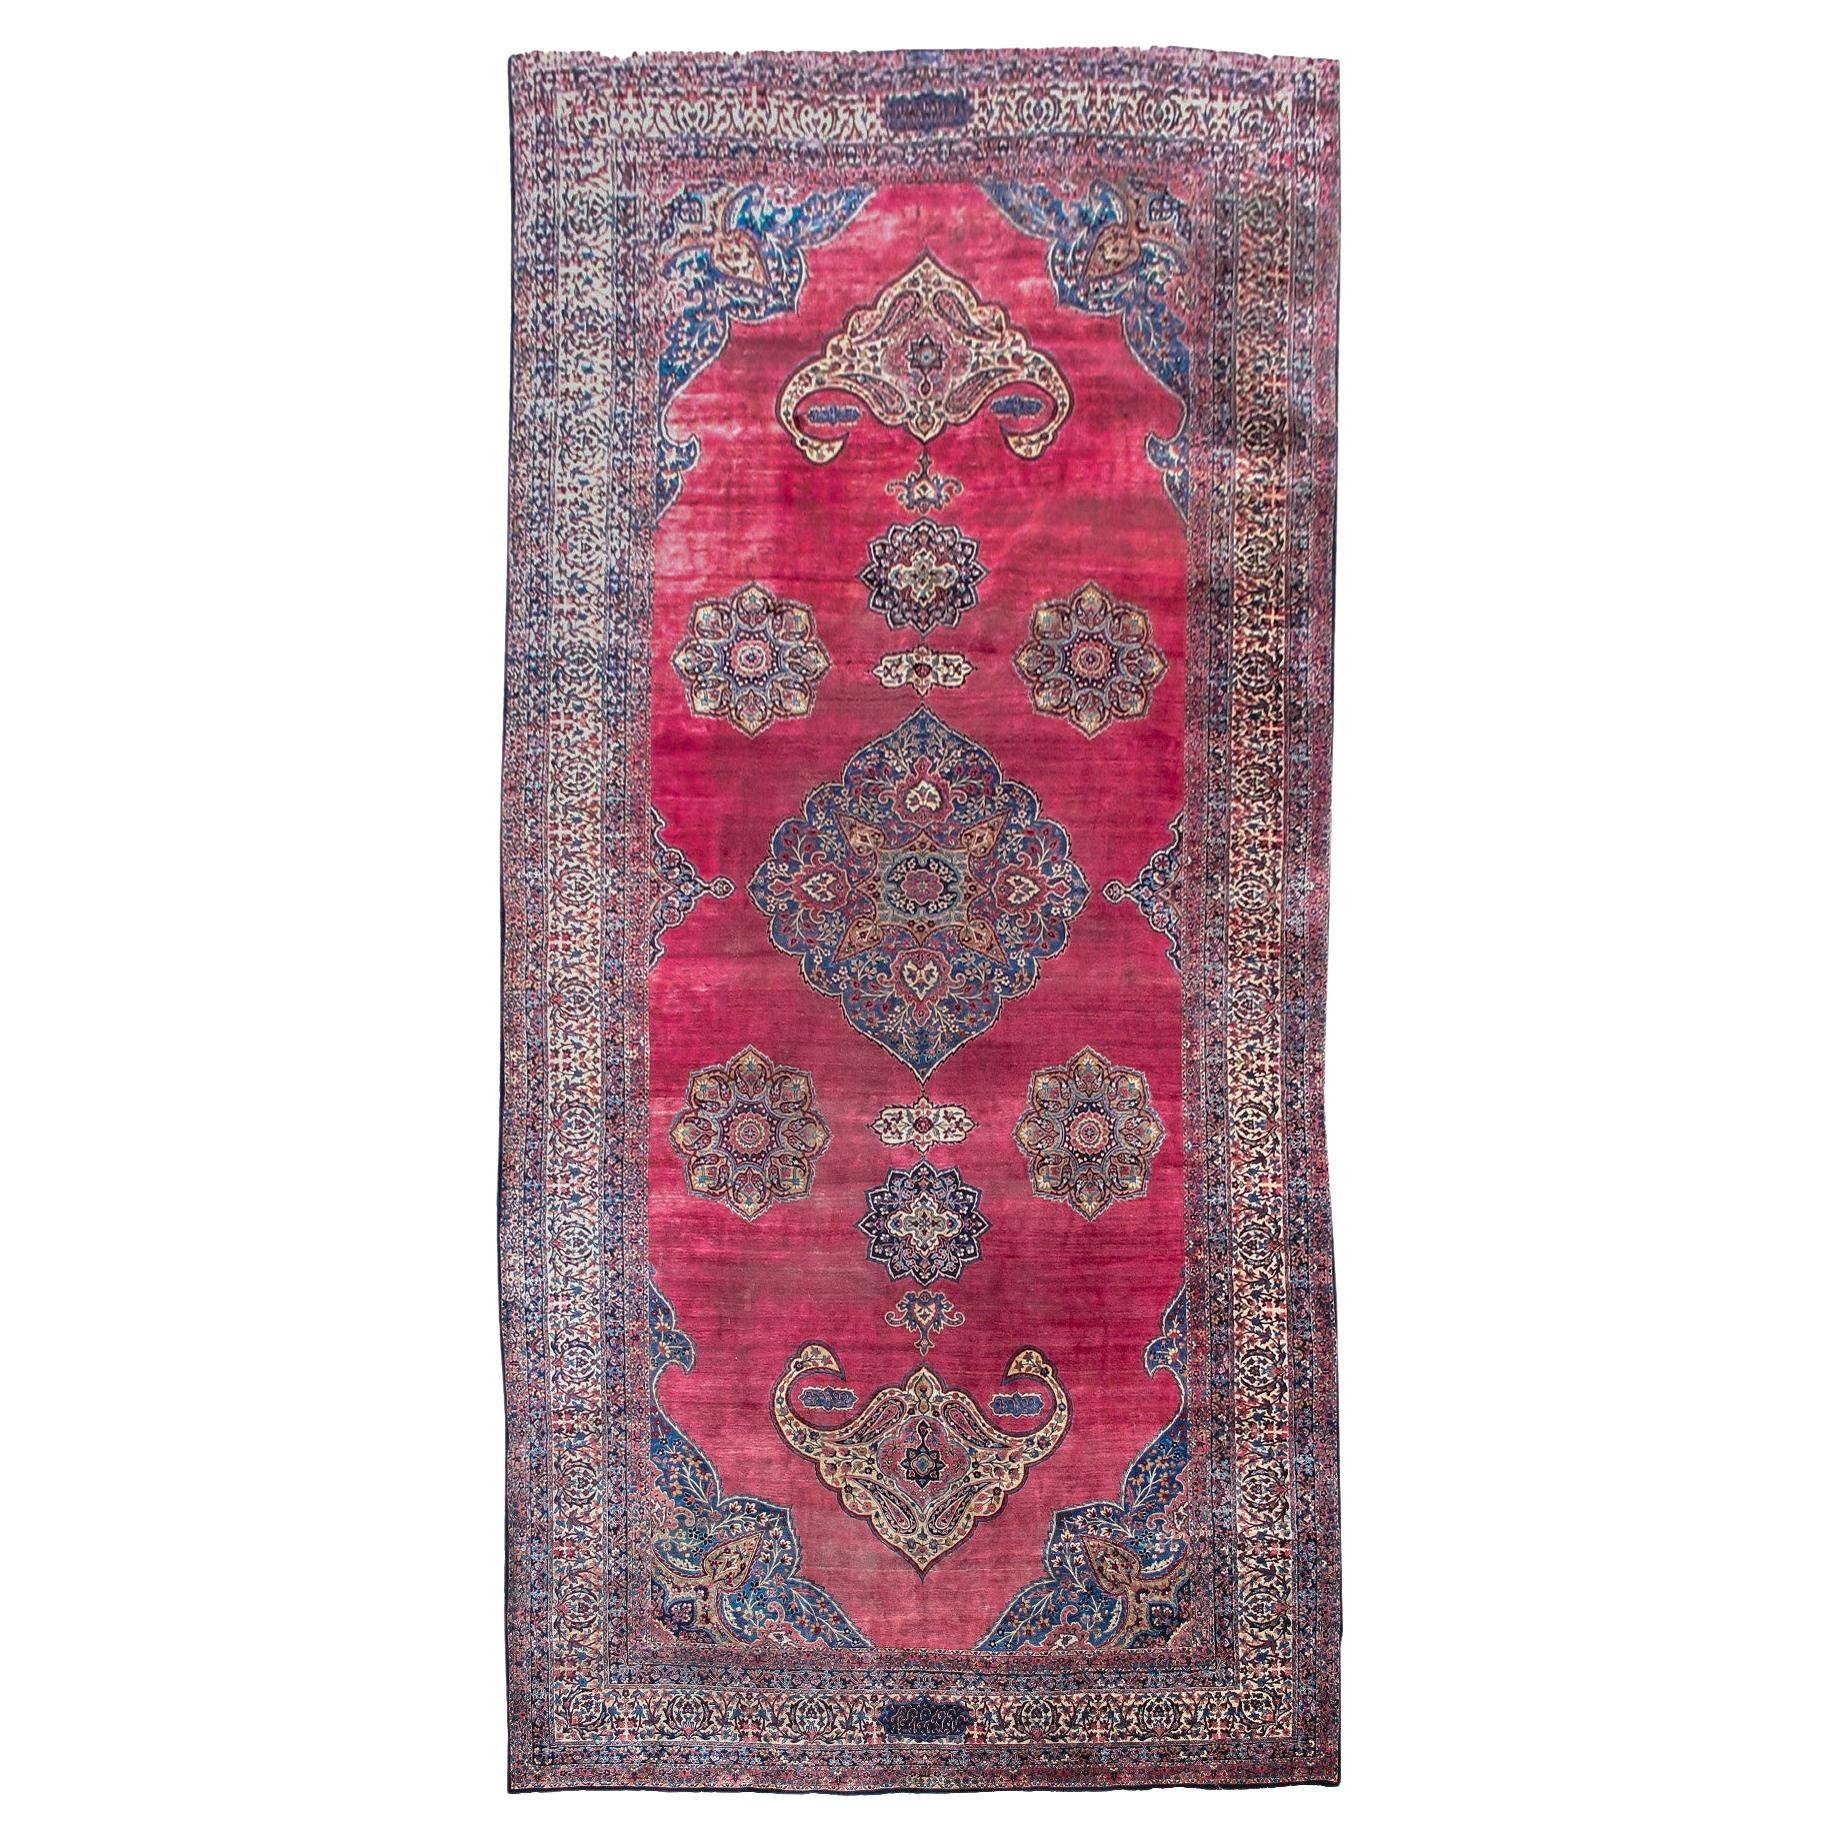 Antique Persian Oversized Kirman Rug, Early 20th Century For Sale